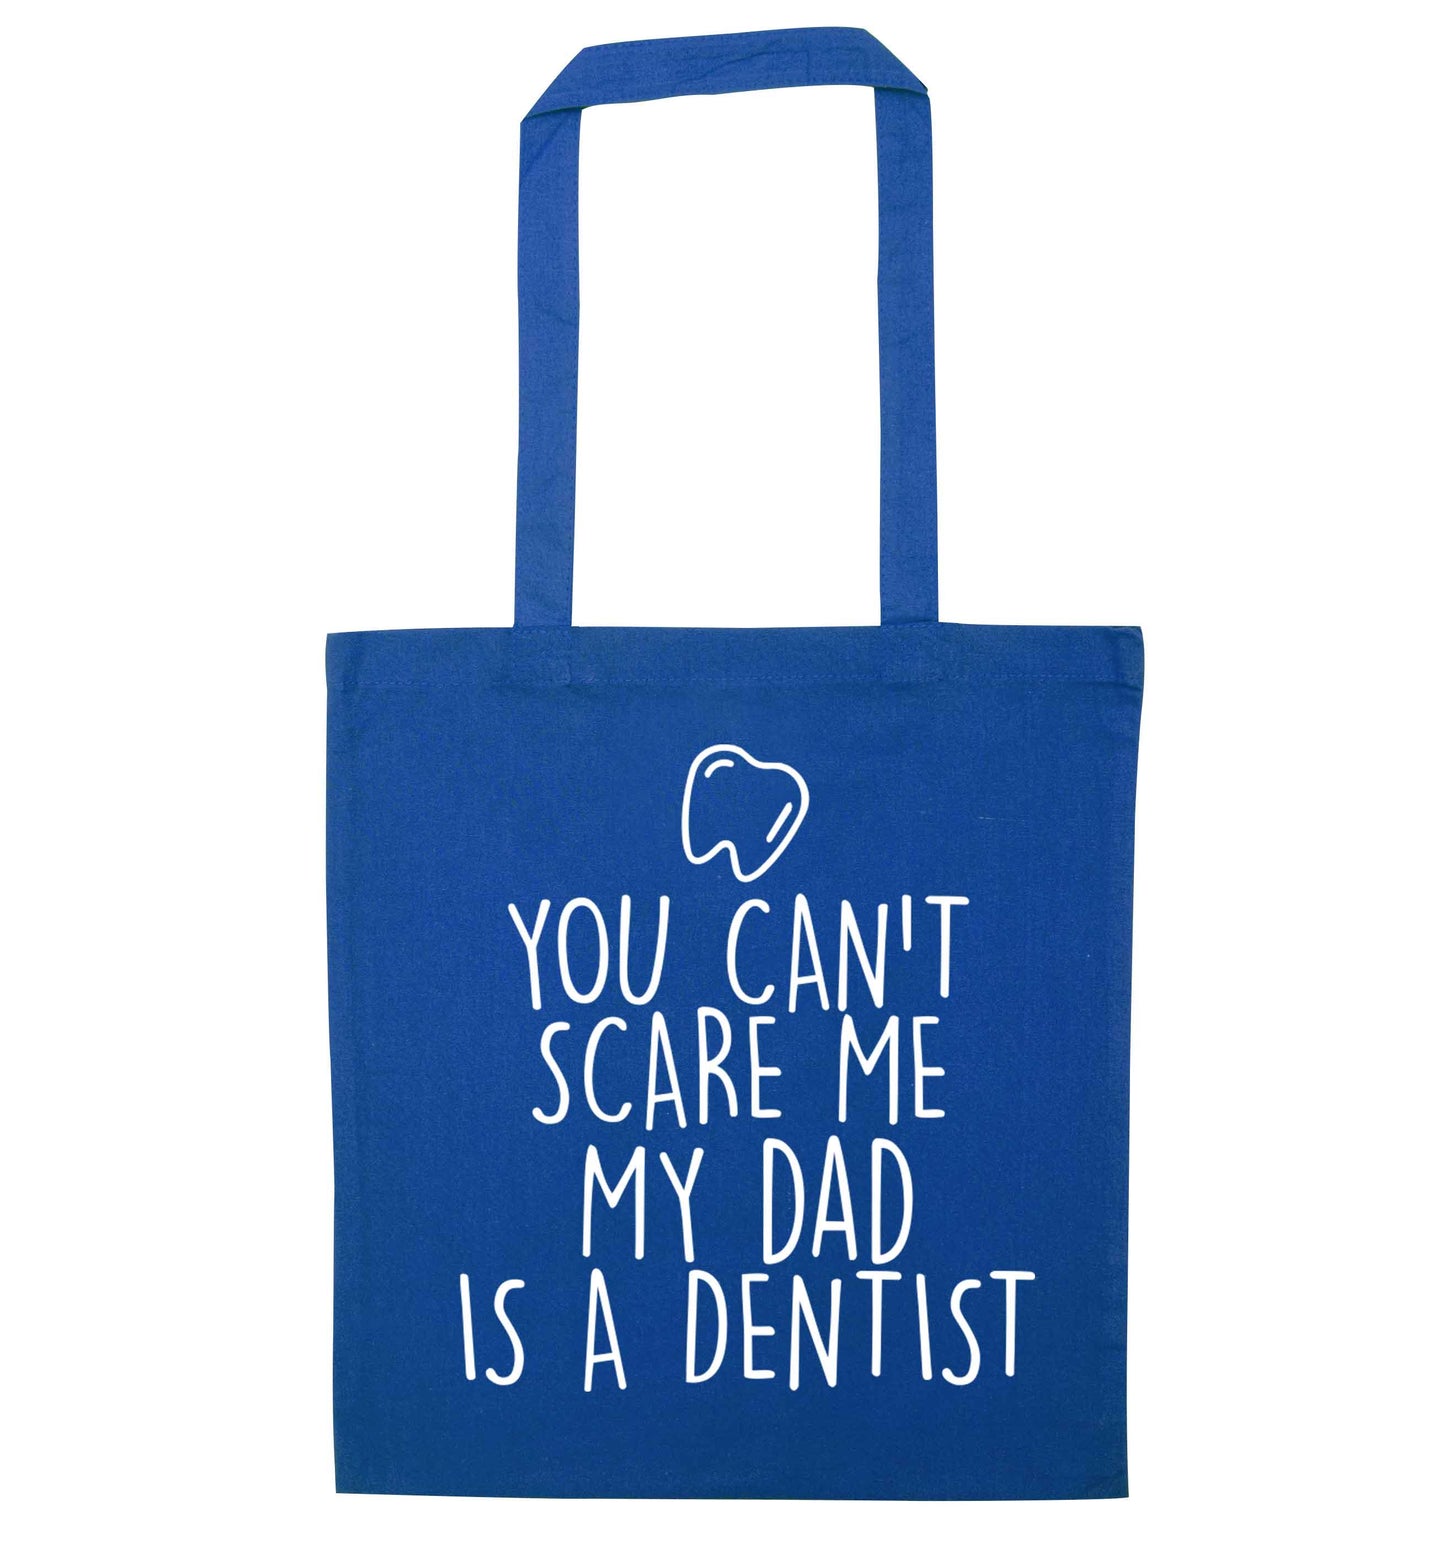 You can't scare me my dad is a dentist blue tote bag